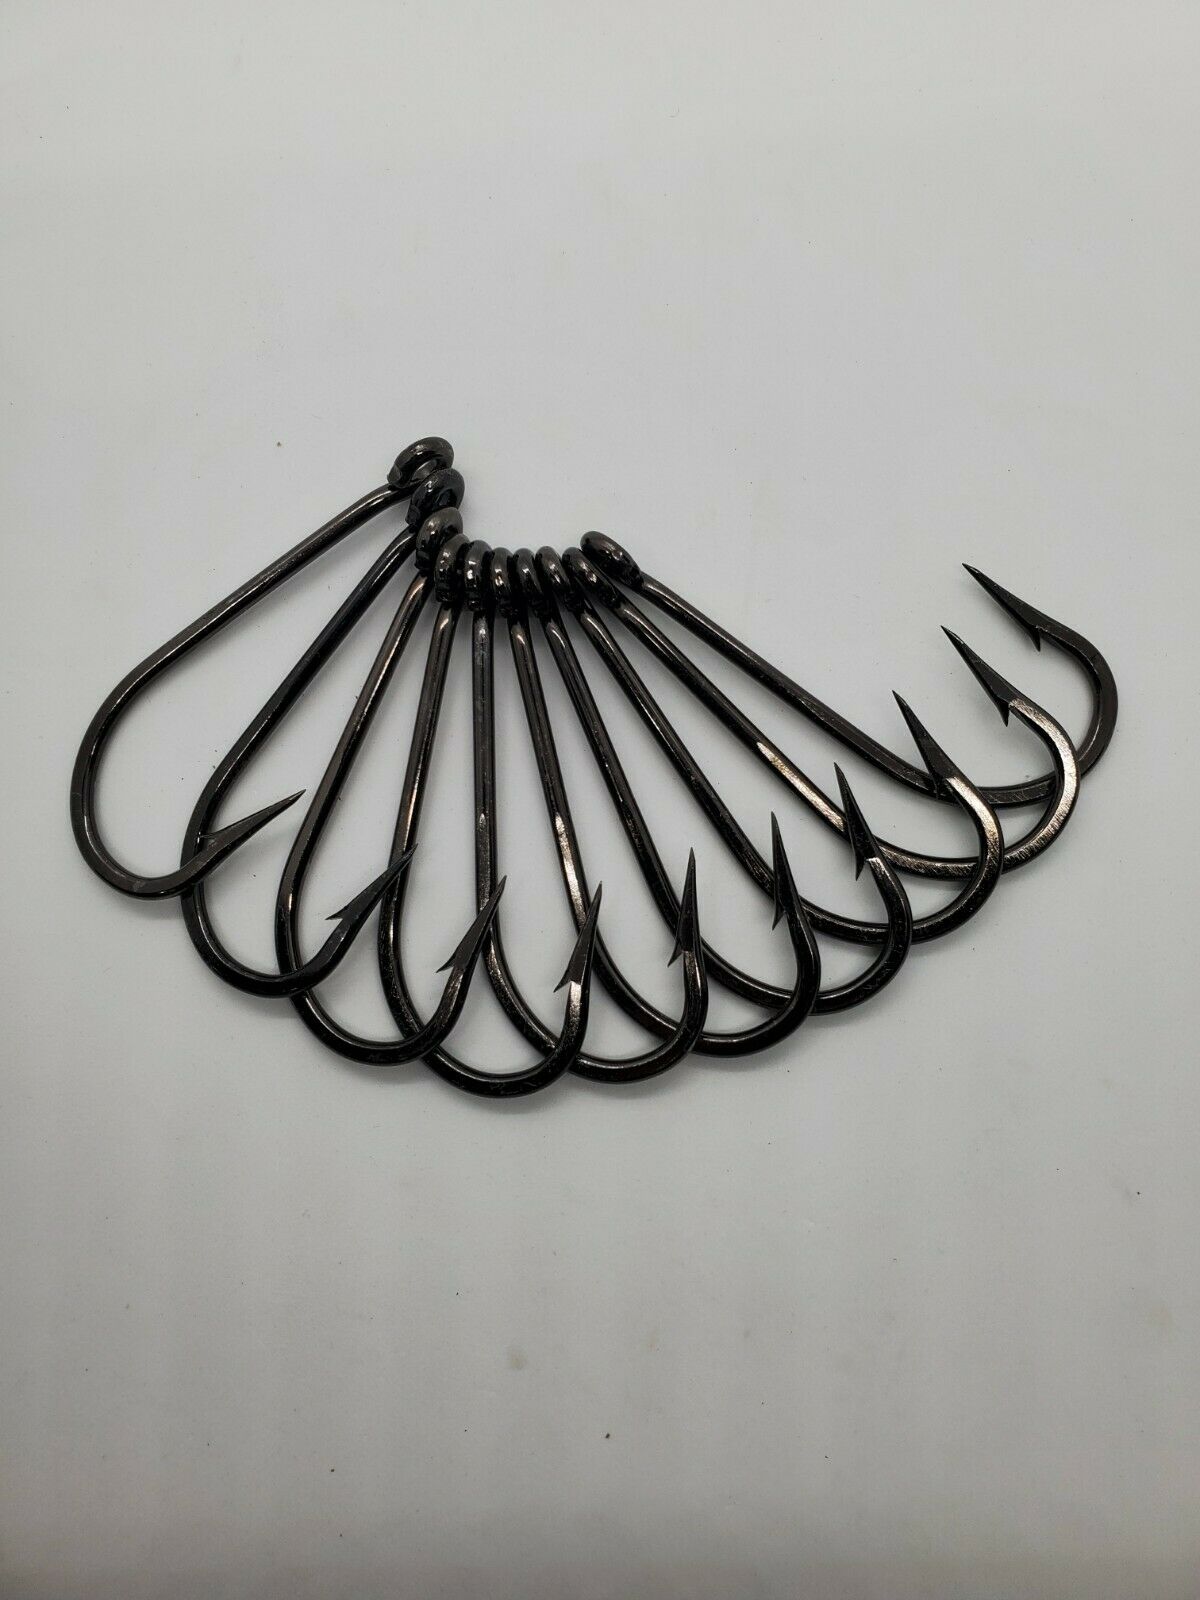 Mustad 3407-DT O'Shaughnessy Hooks – Fisherman's Headquarters